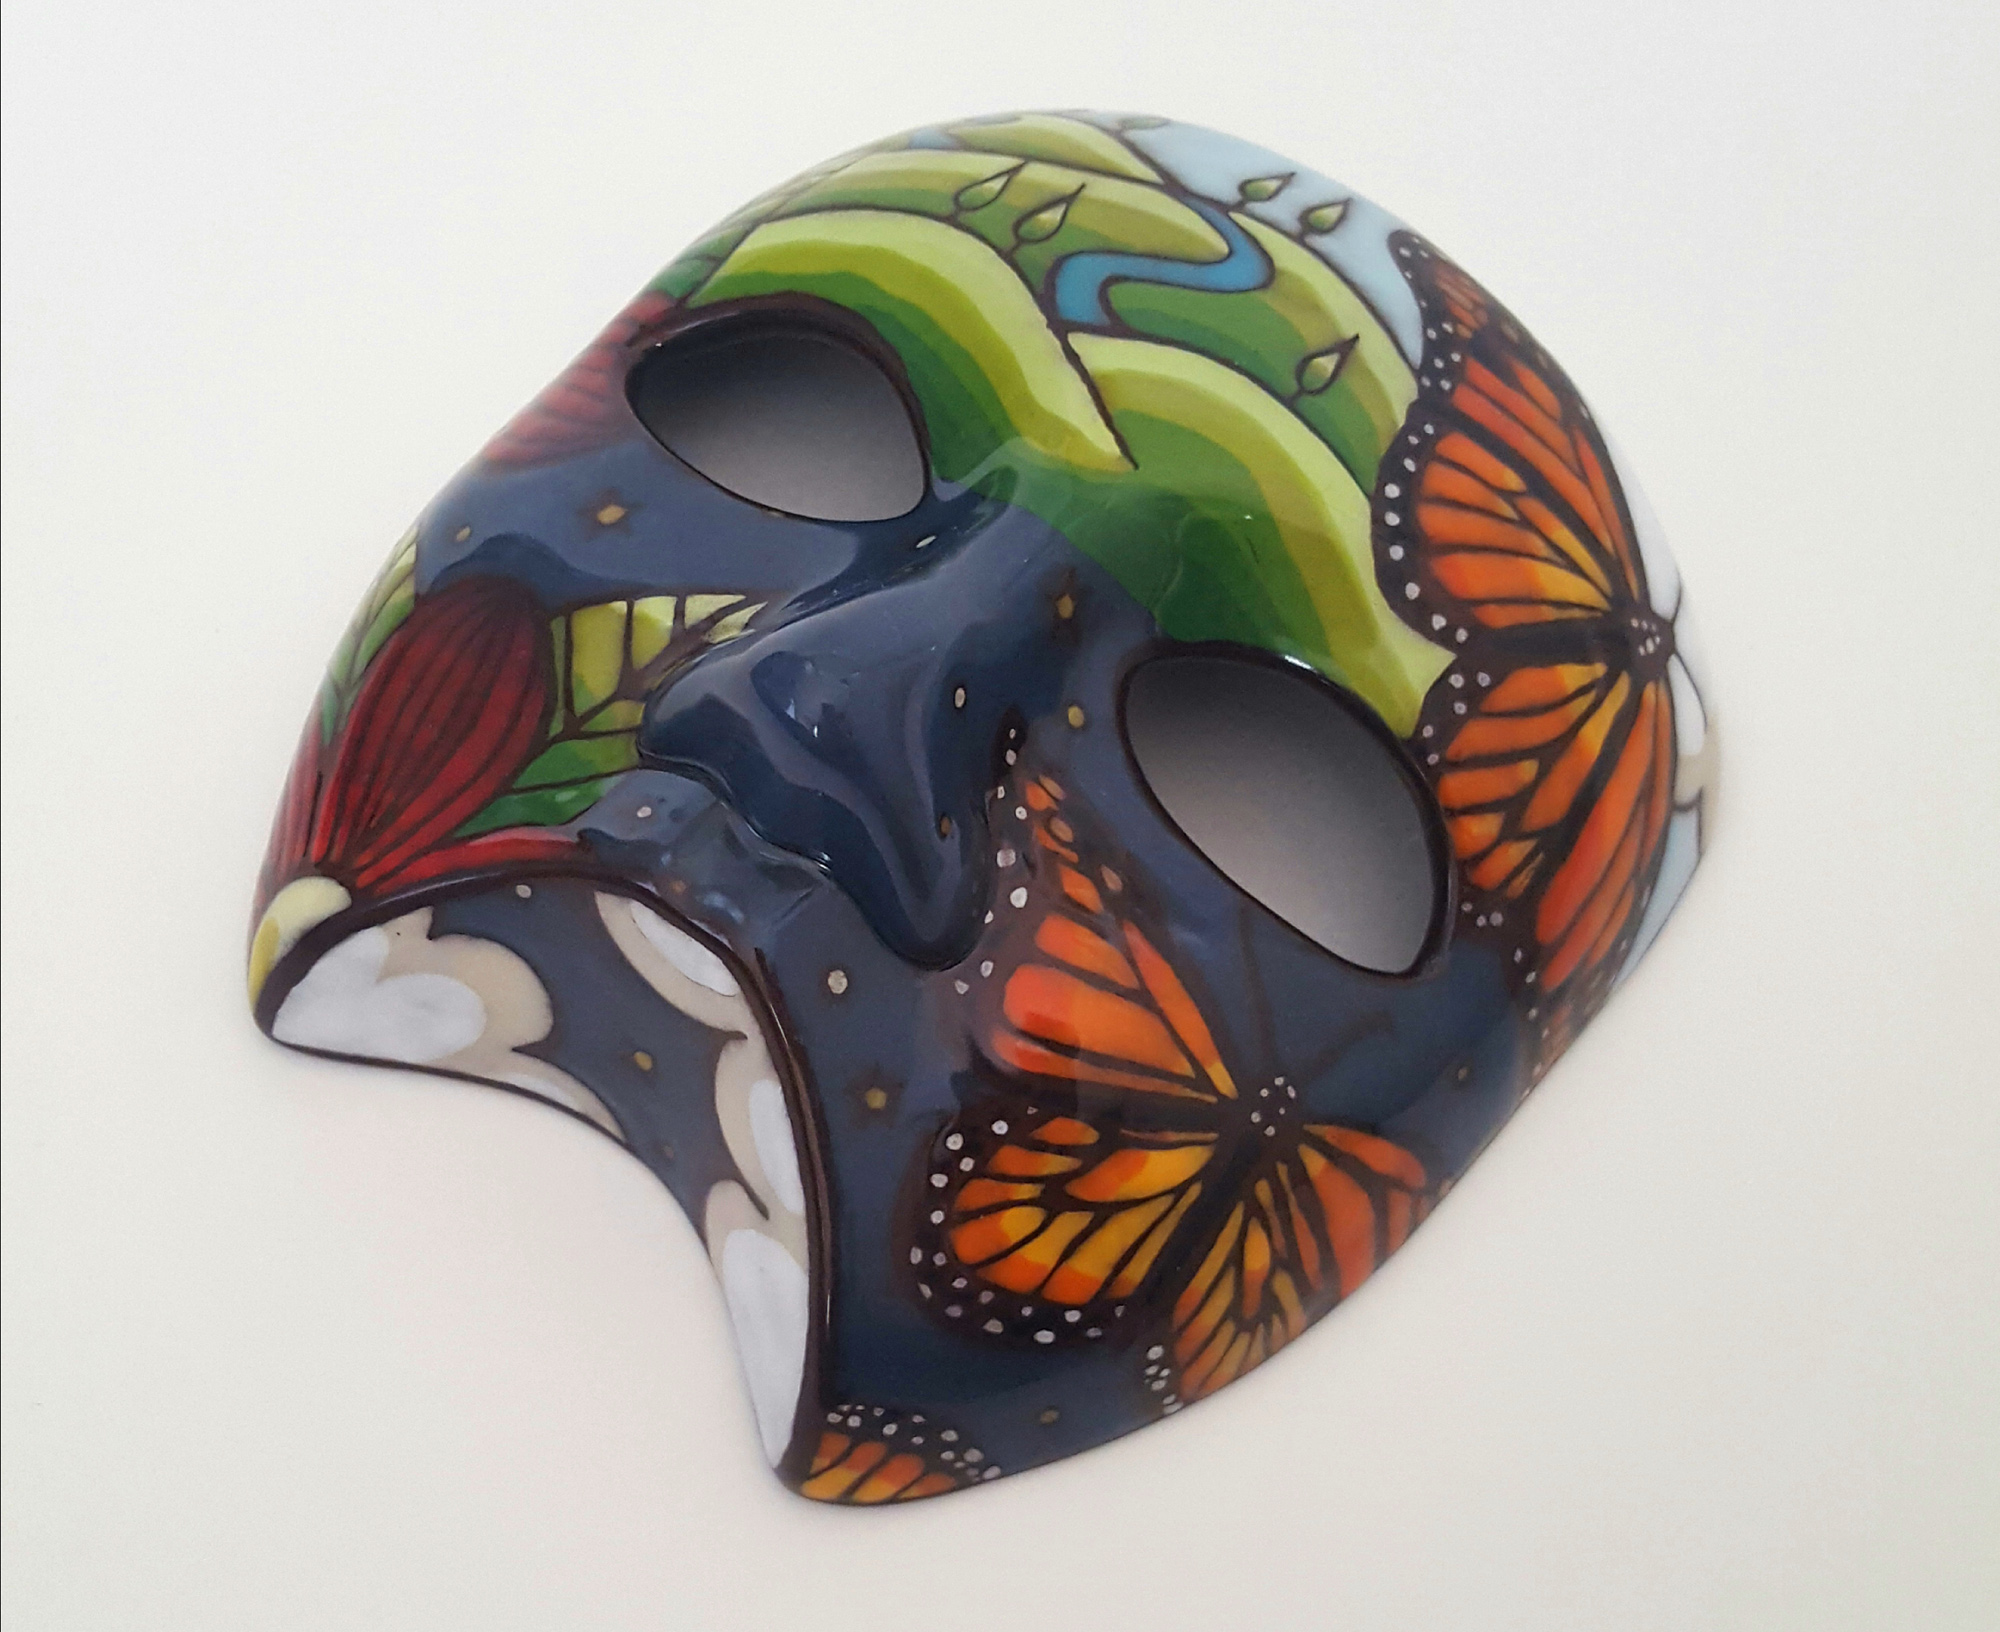 Mask with painted images of monarch butterflies, clouds, red flowers, and landscapes